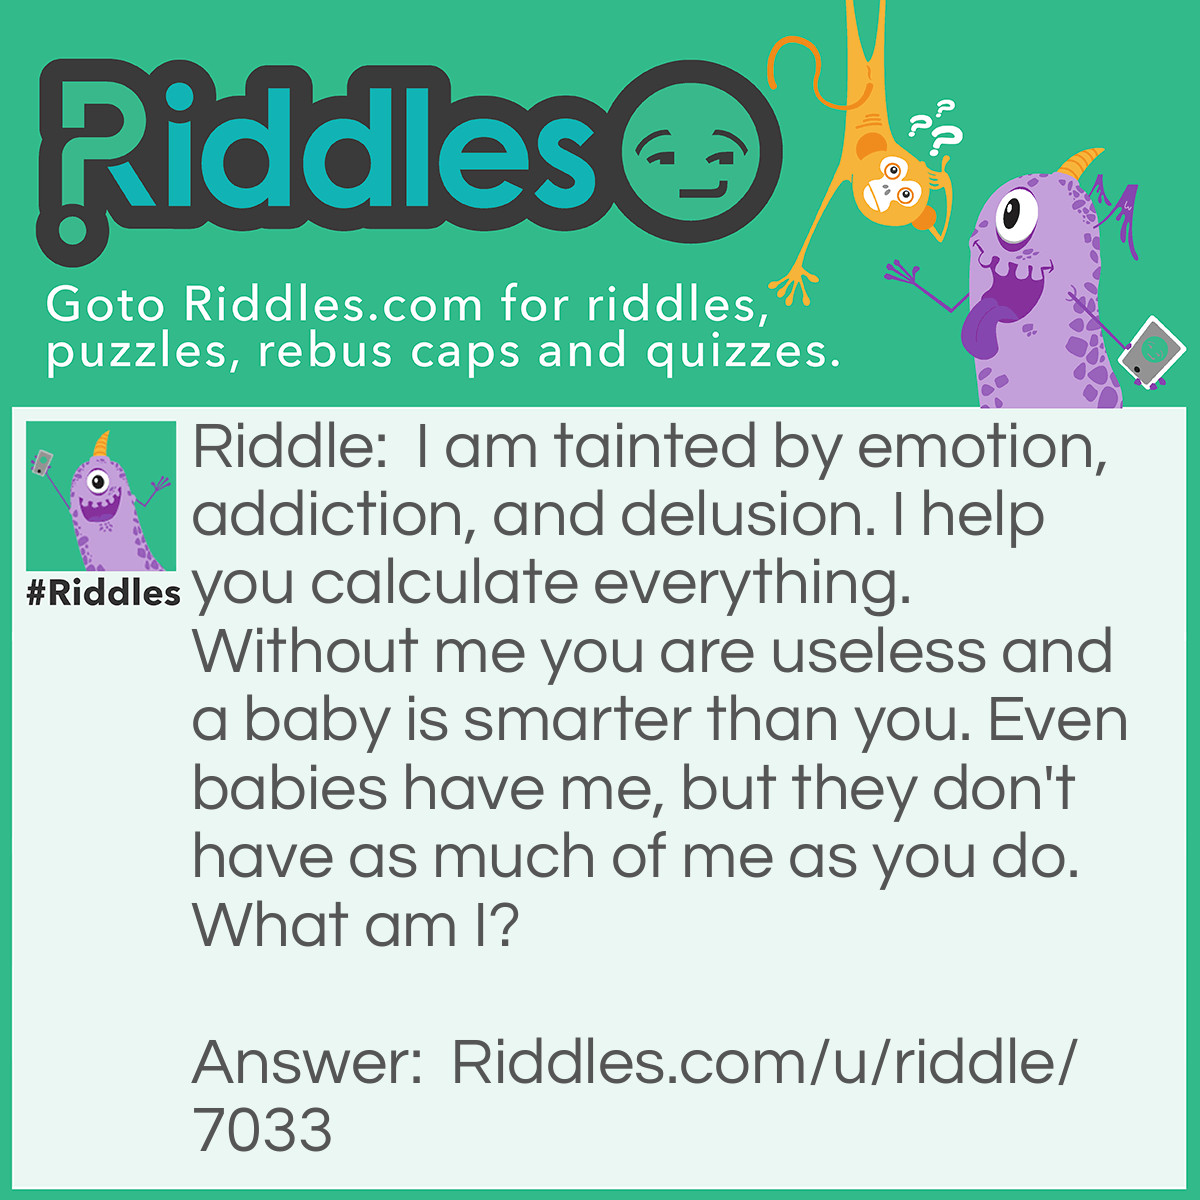 Riddle: I am tainted by emotion, addiction, and delusion. I help you calculate everything. Without me you are useless and a baby is smarter than you. Even babies have me, but they don't have as much of me as you do. What am I? Answer: I am thought.